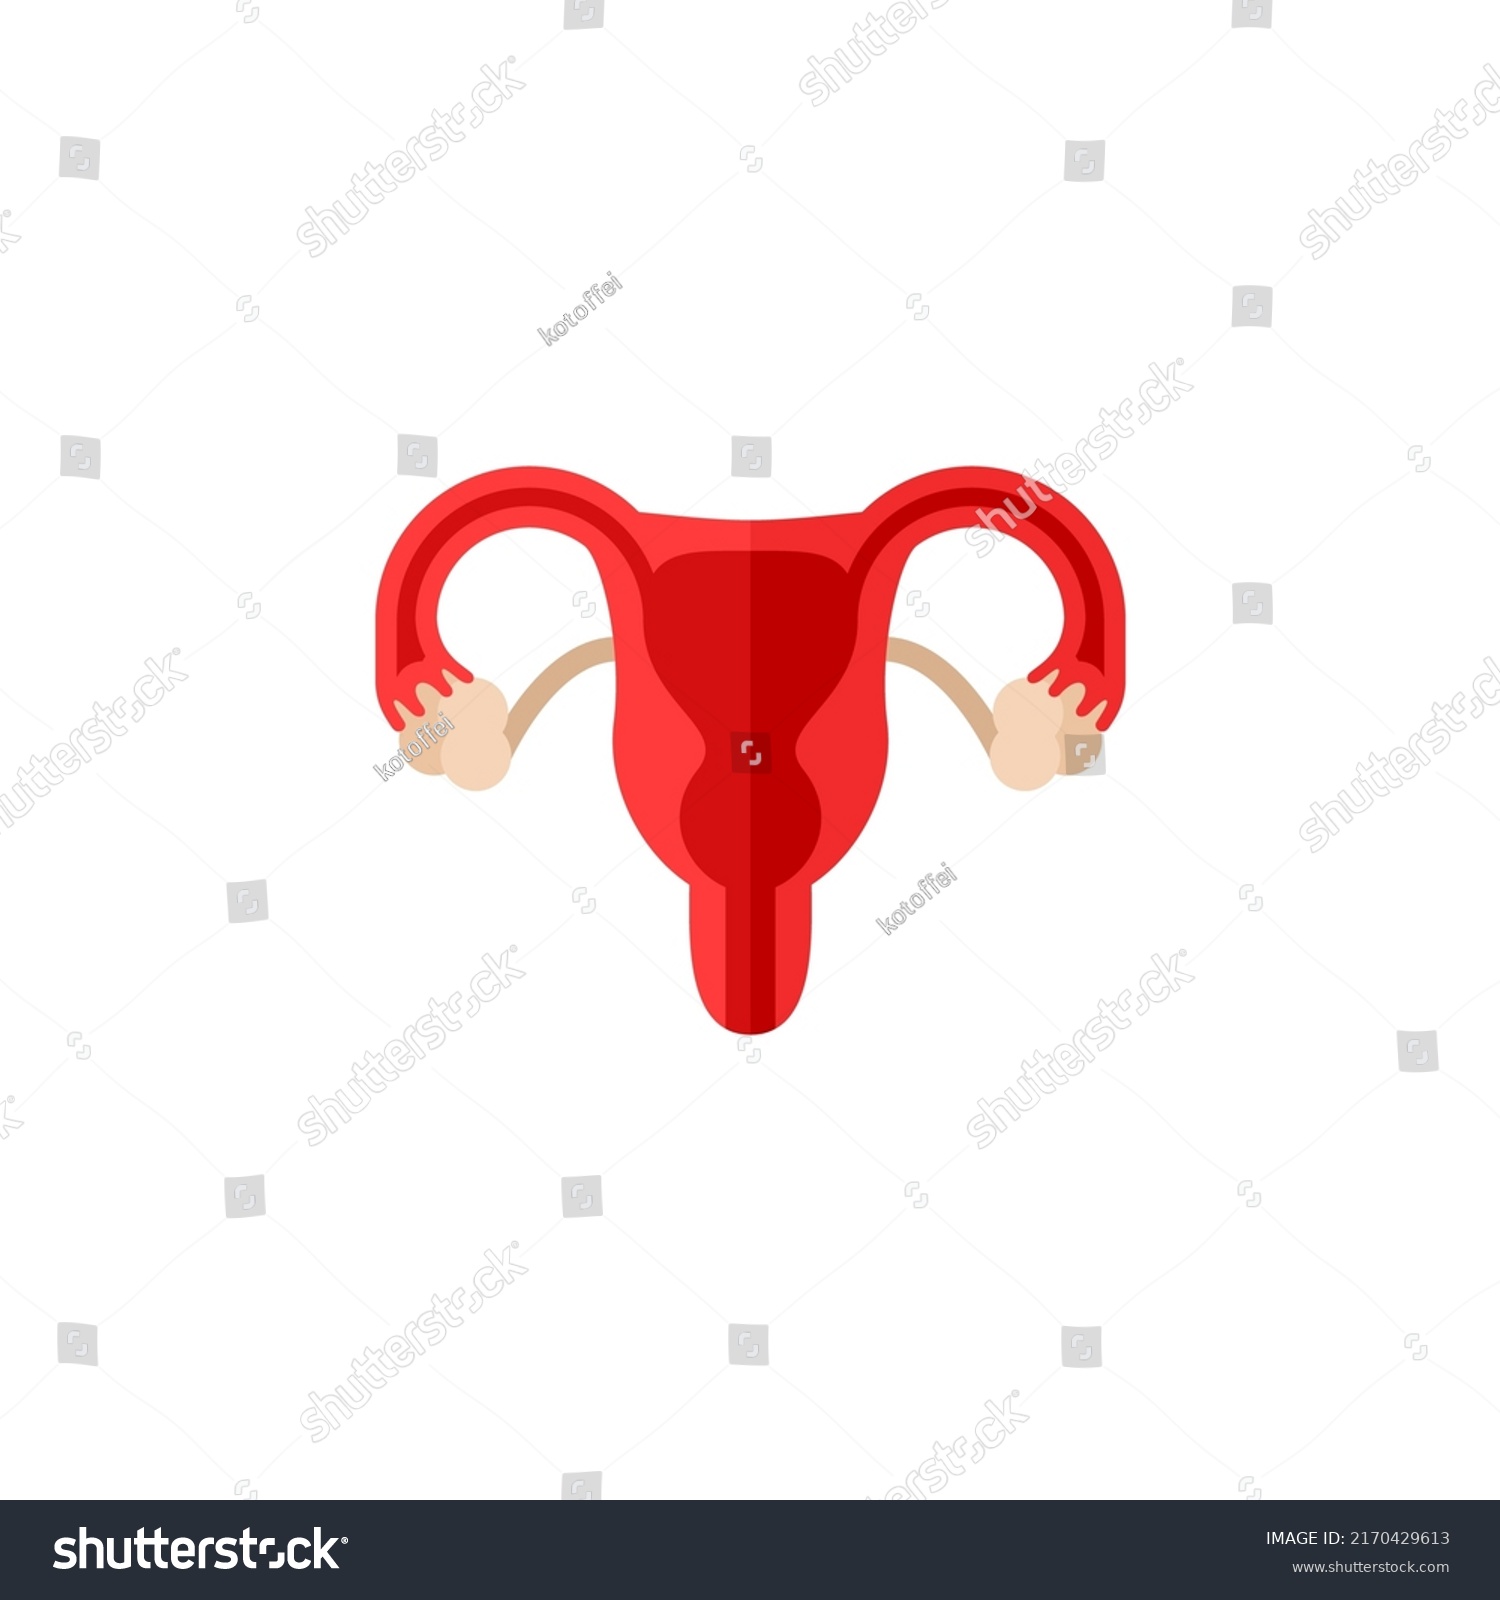 Female Reproductive System Anatomy Abstract Flat Stock Vector Royalty